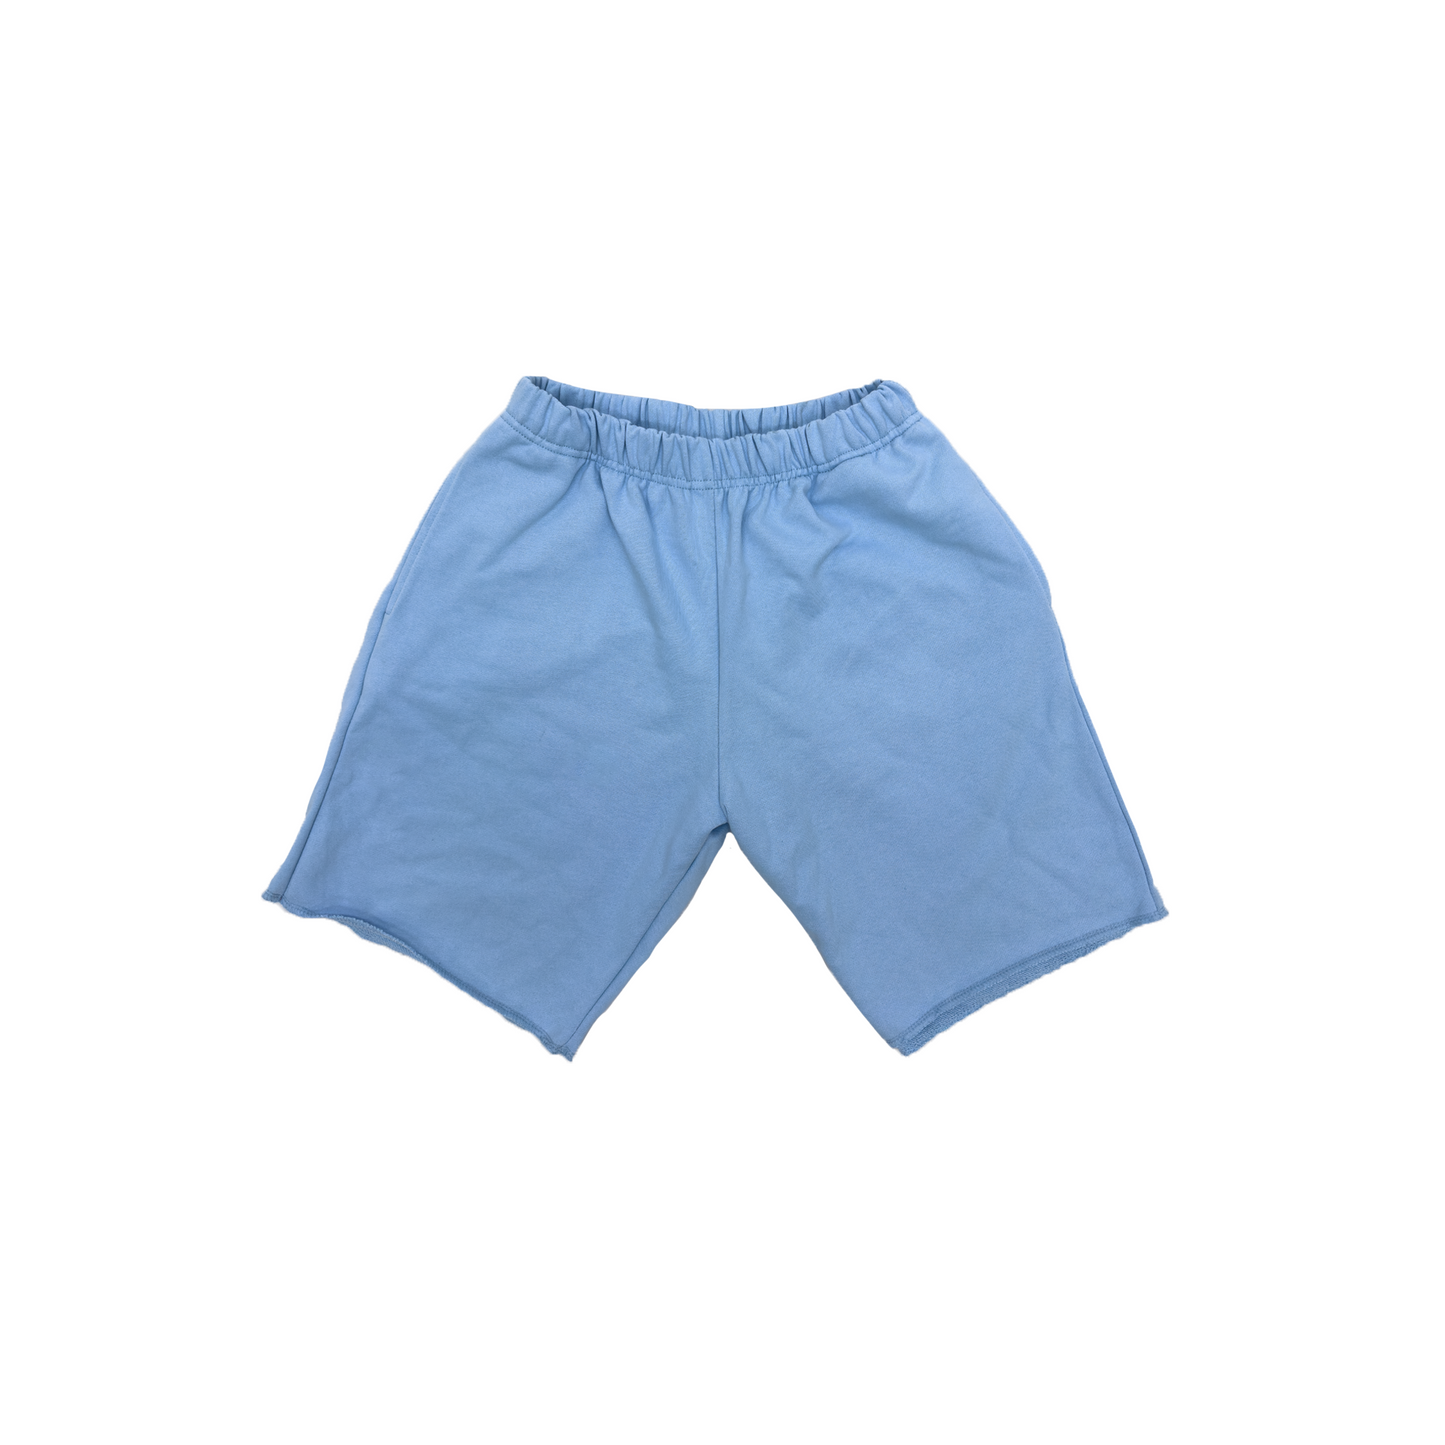 500 GSM 'Baby Blue' French Terry Cotton Sweat Shorts – LucidBlanks